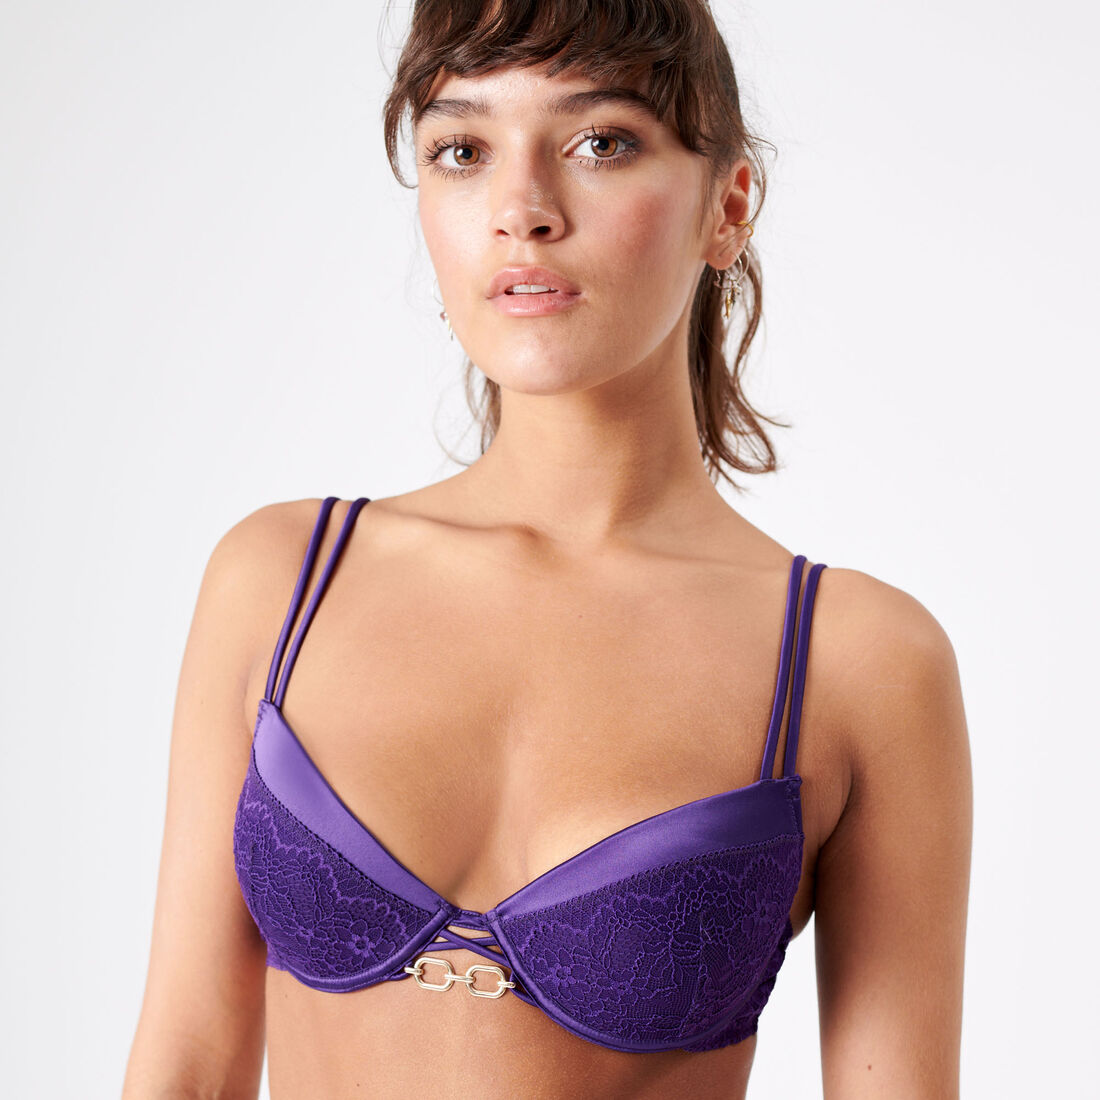 push-up bra with fine lace and jewellery;